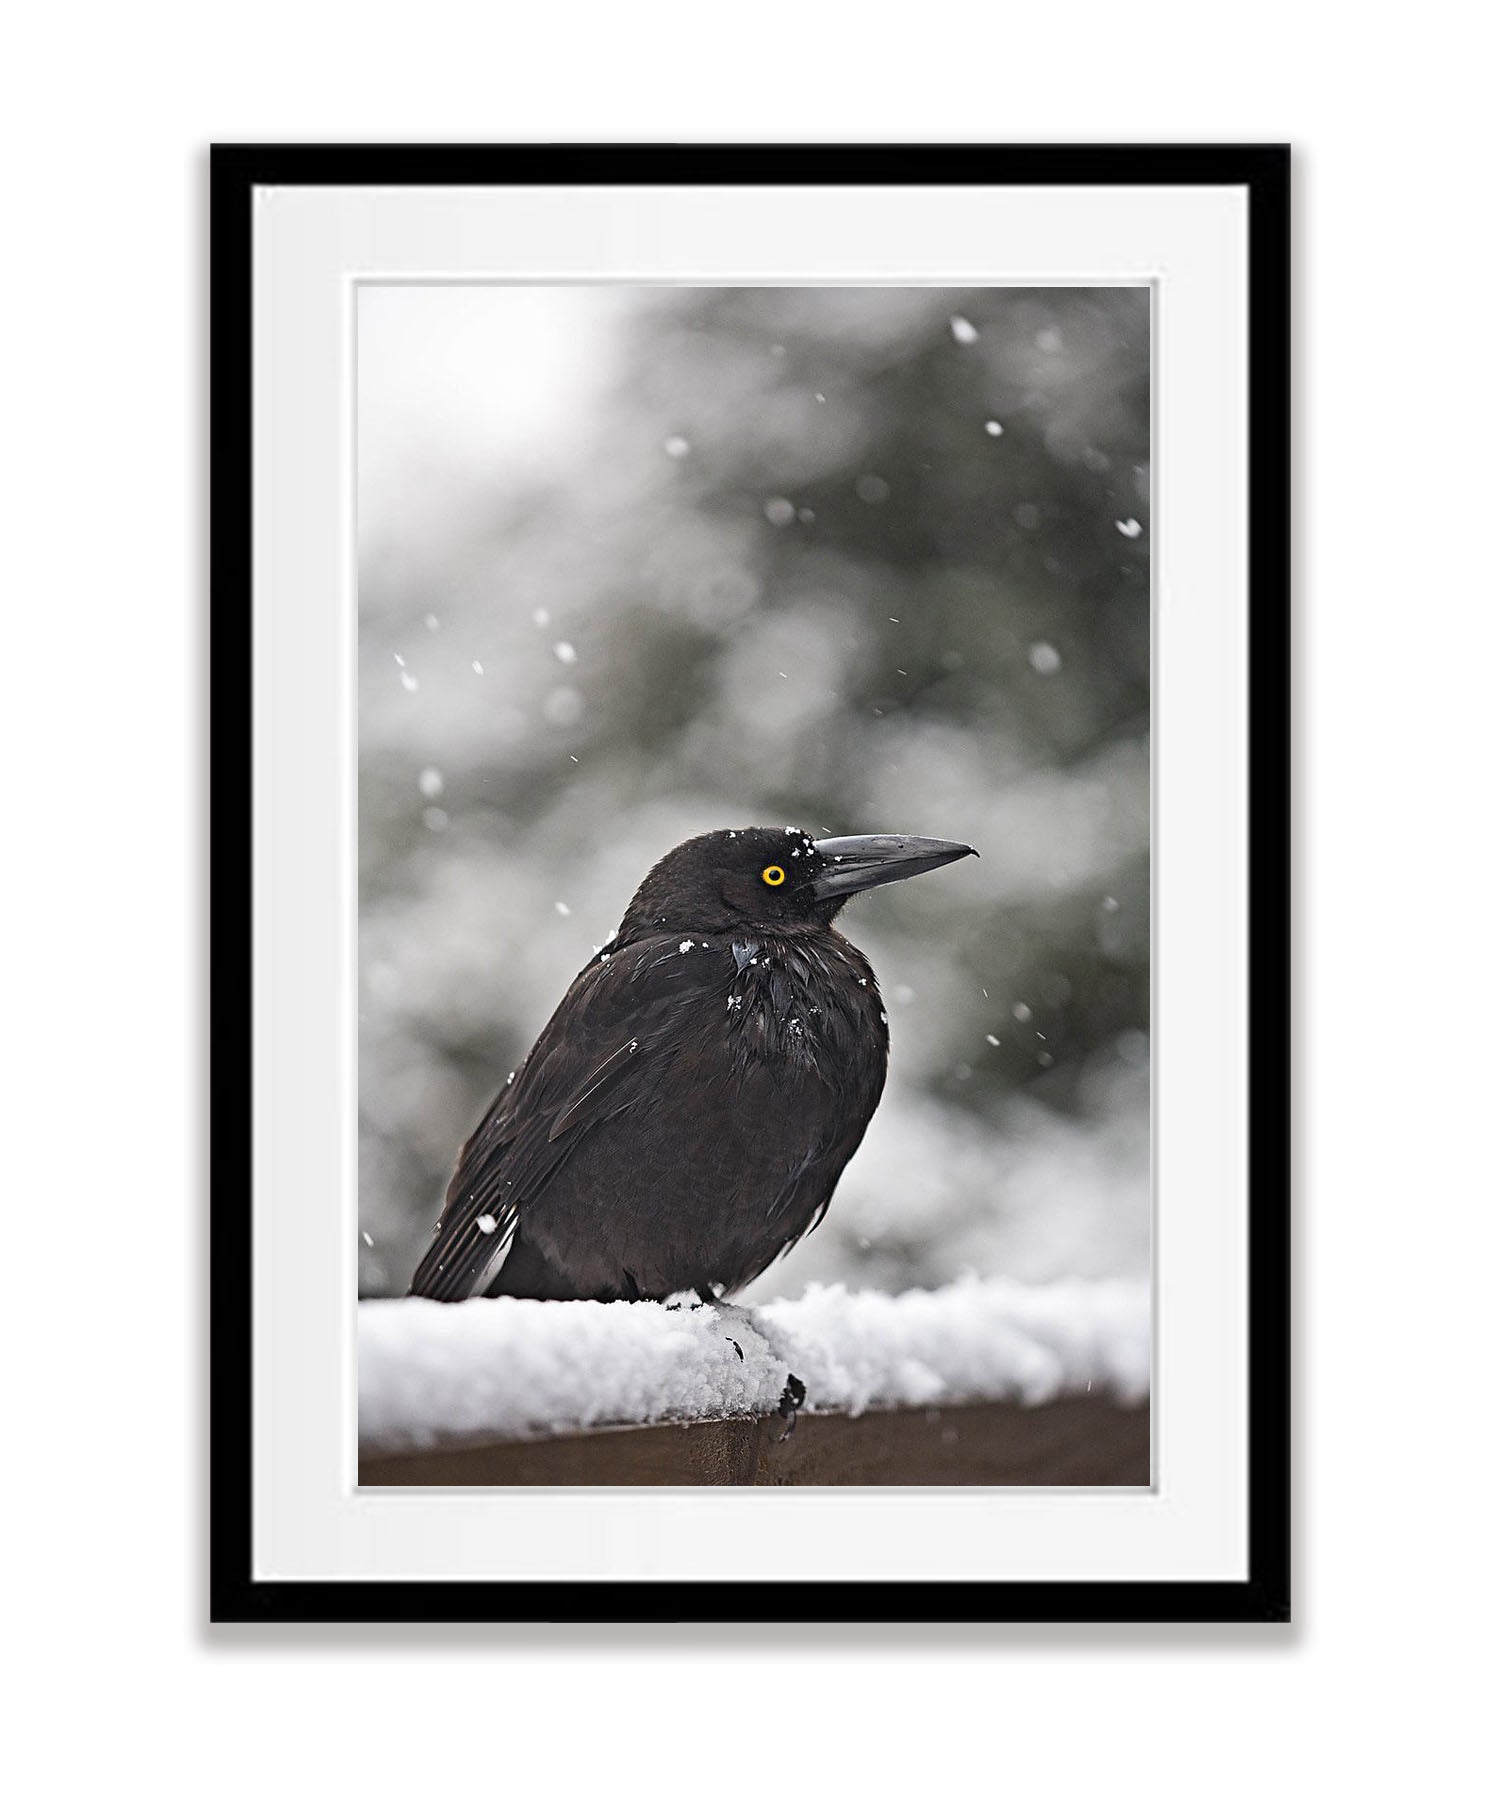 Currawong in the snow, Cradle Mountain, Tasmania